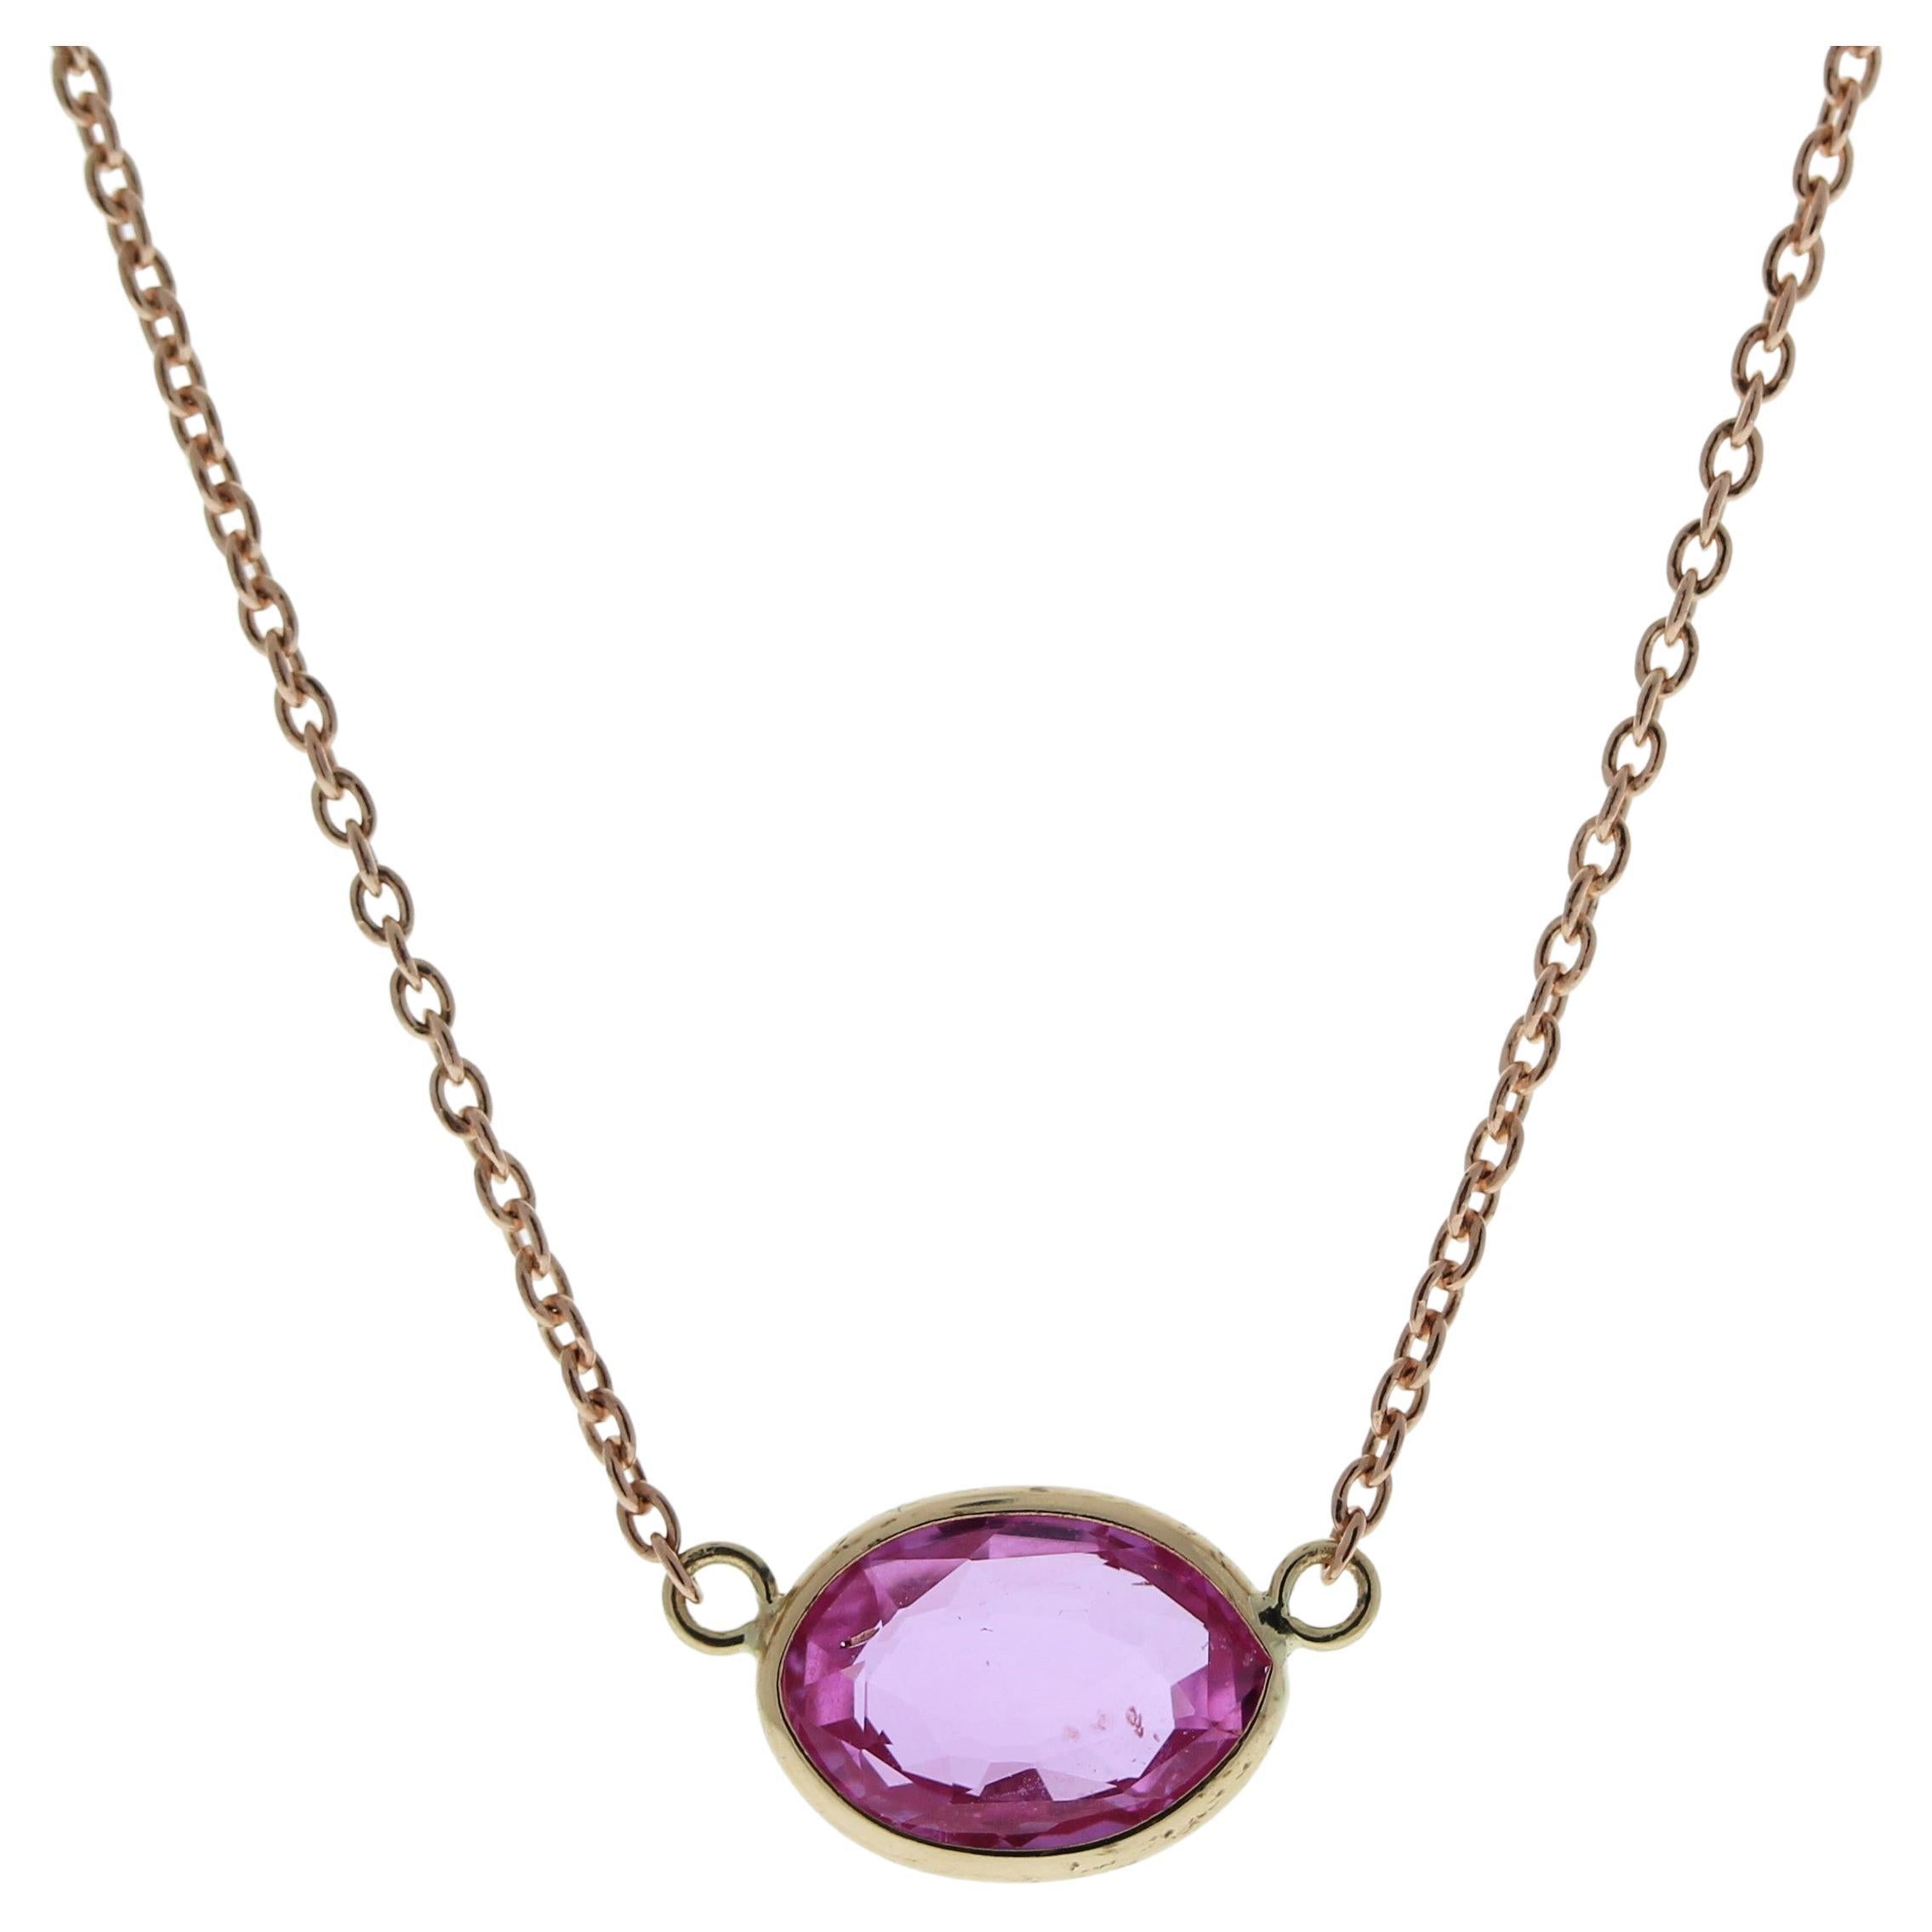 1.54 Carat Oval Sapphire Pink Fashion Necklaces In 14k Rose Gold For Sale